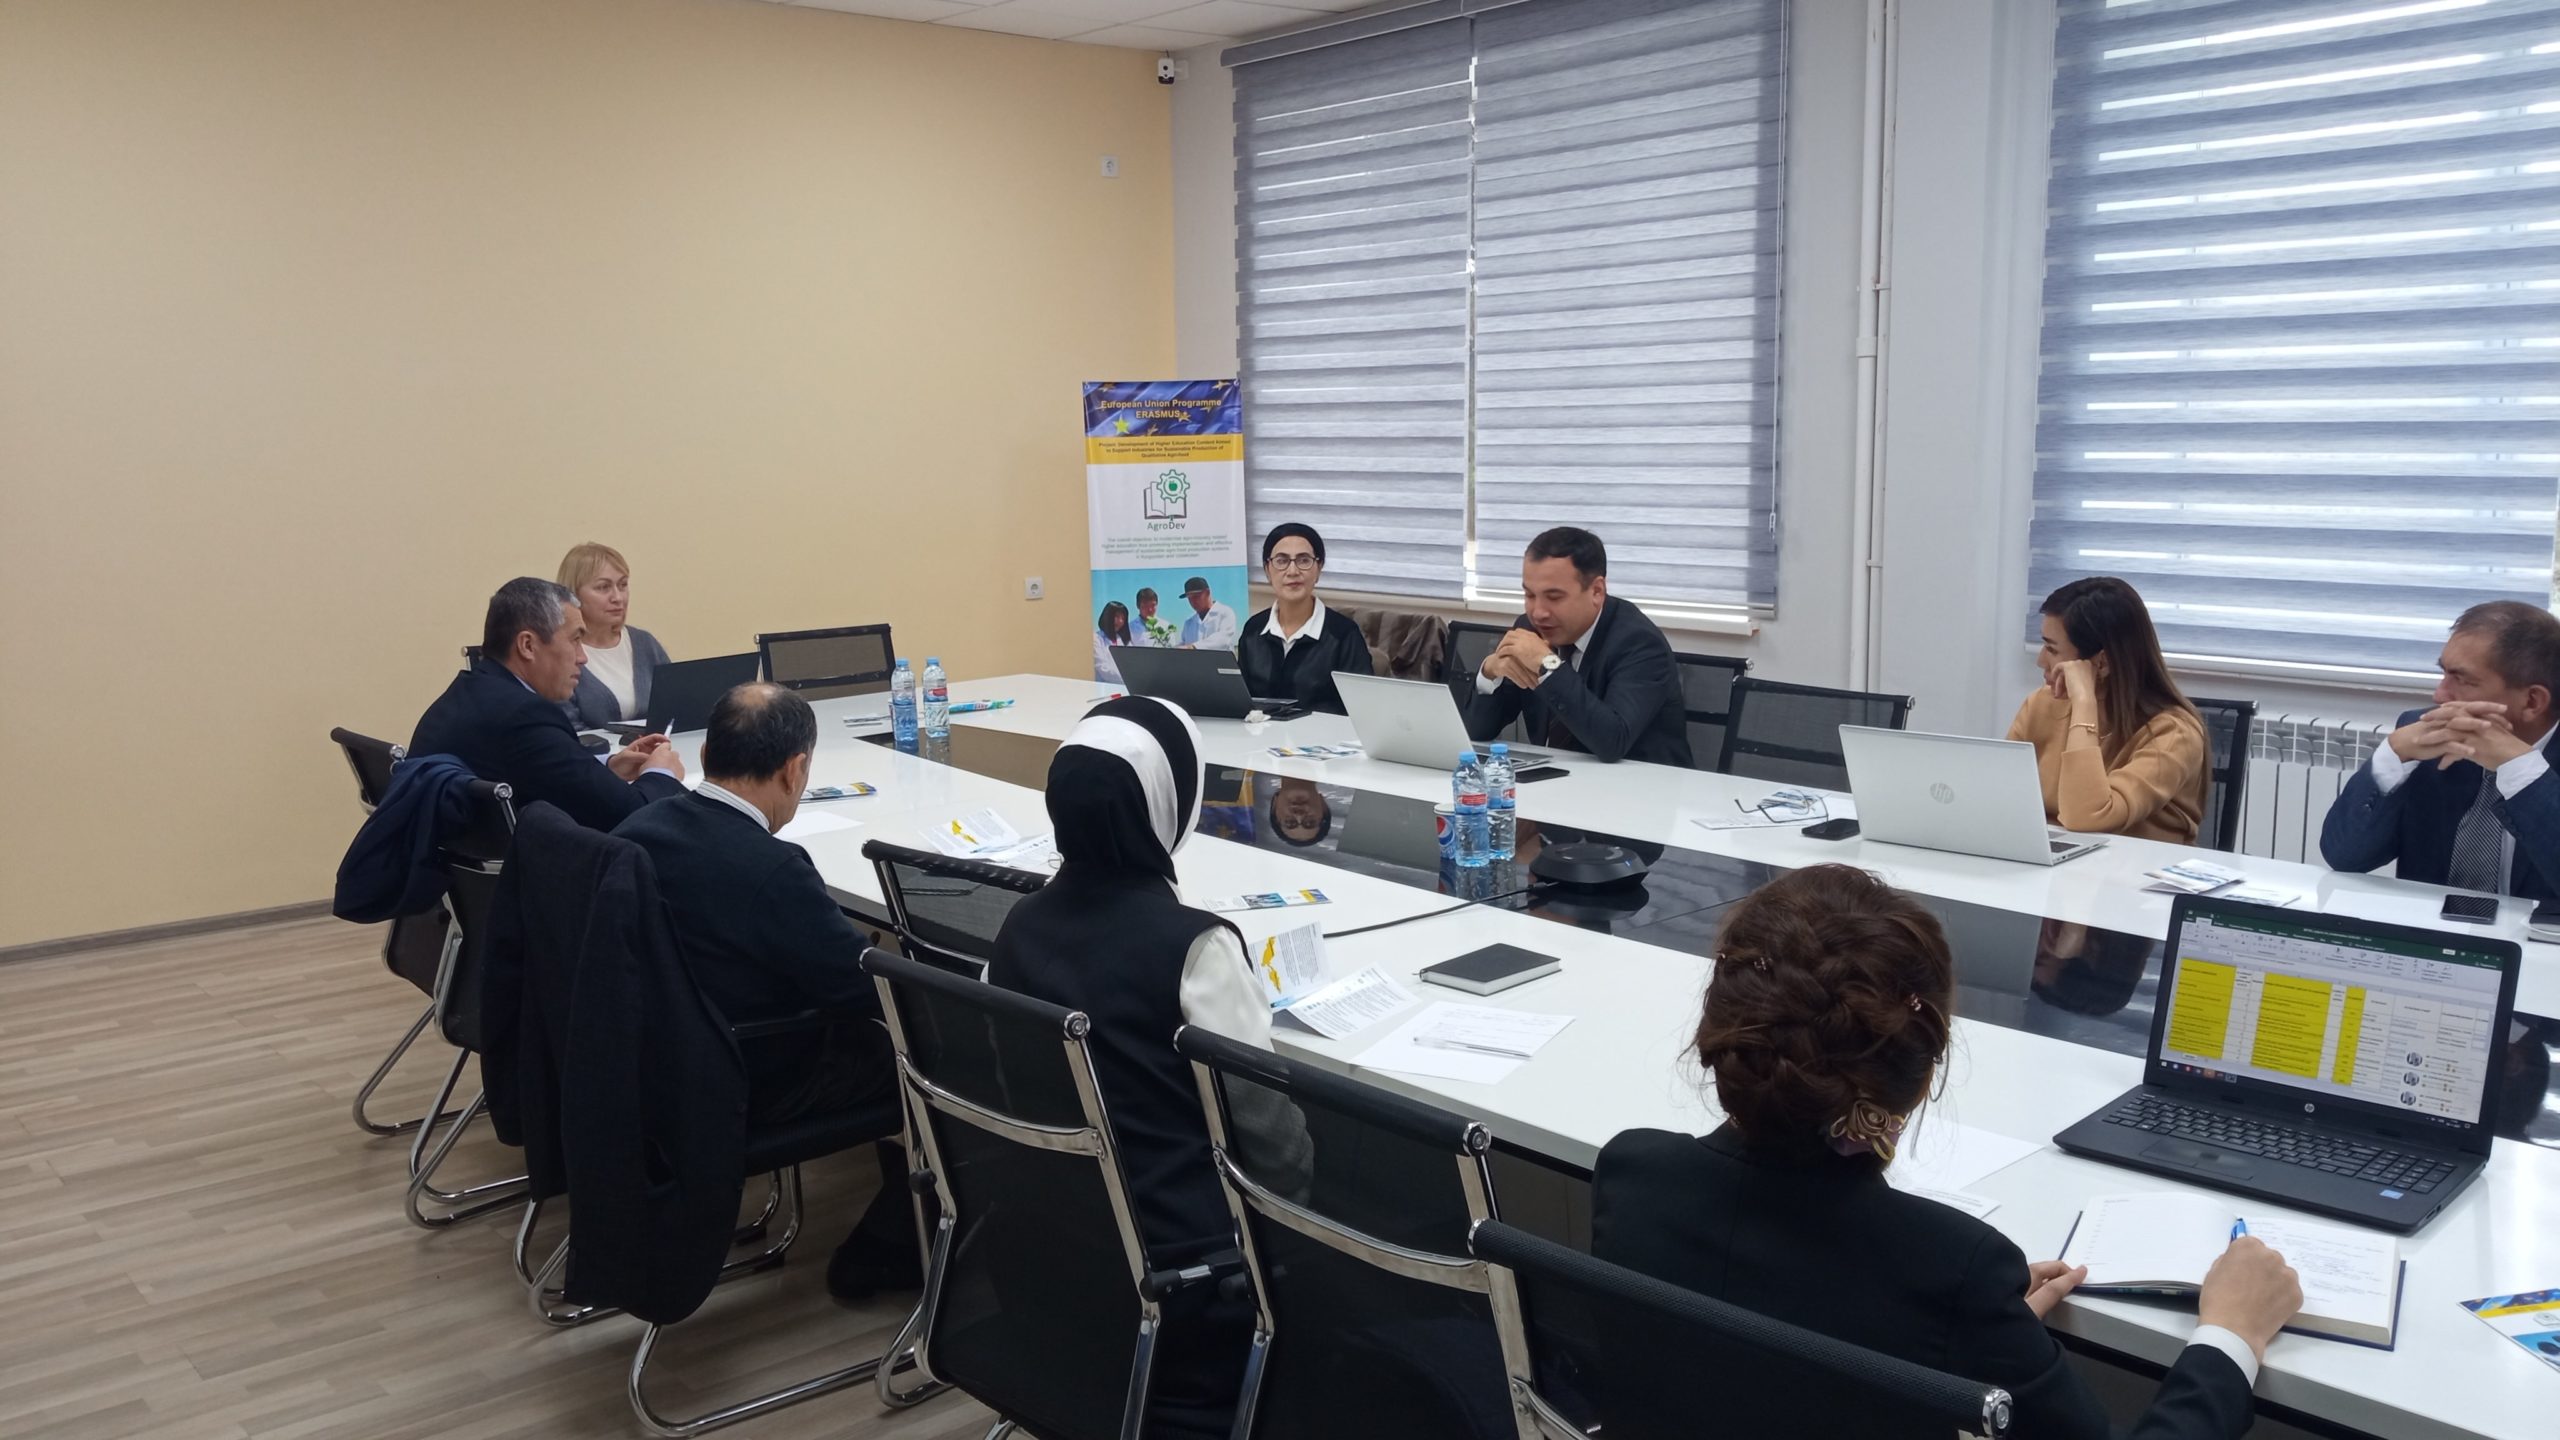 You are currently viewing Planning joint future initiatives of the Latvia University of Life Sciences and Technologies and the Samarkand branch of the Tashkent State University of Economics. 